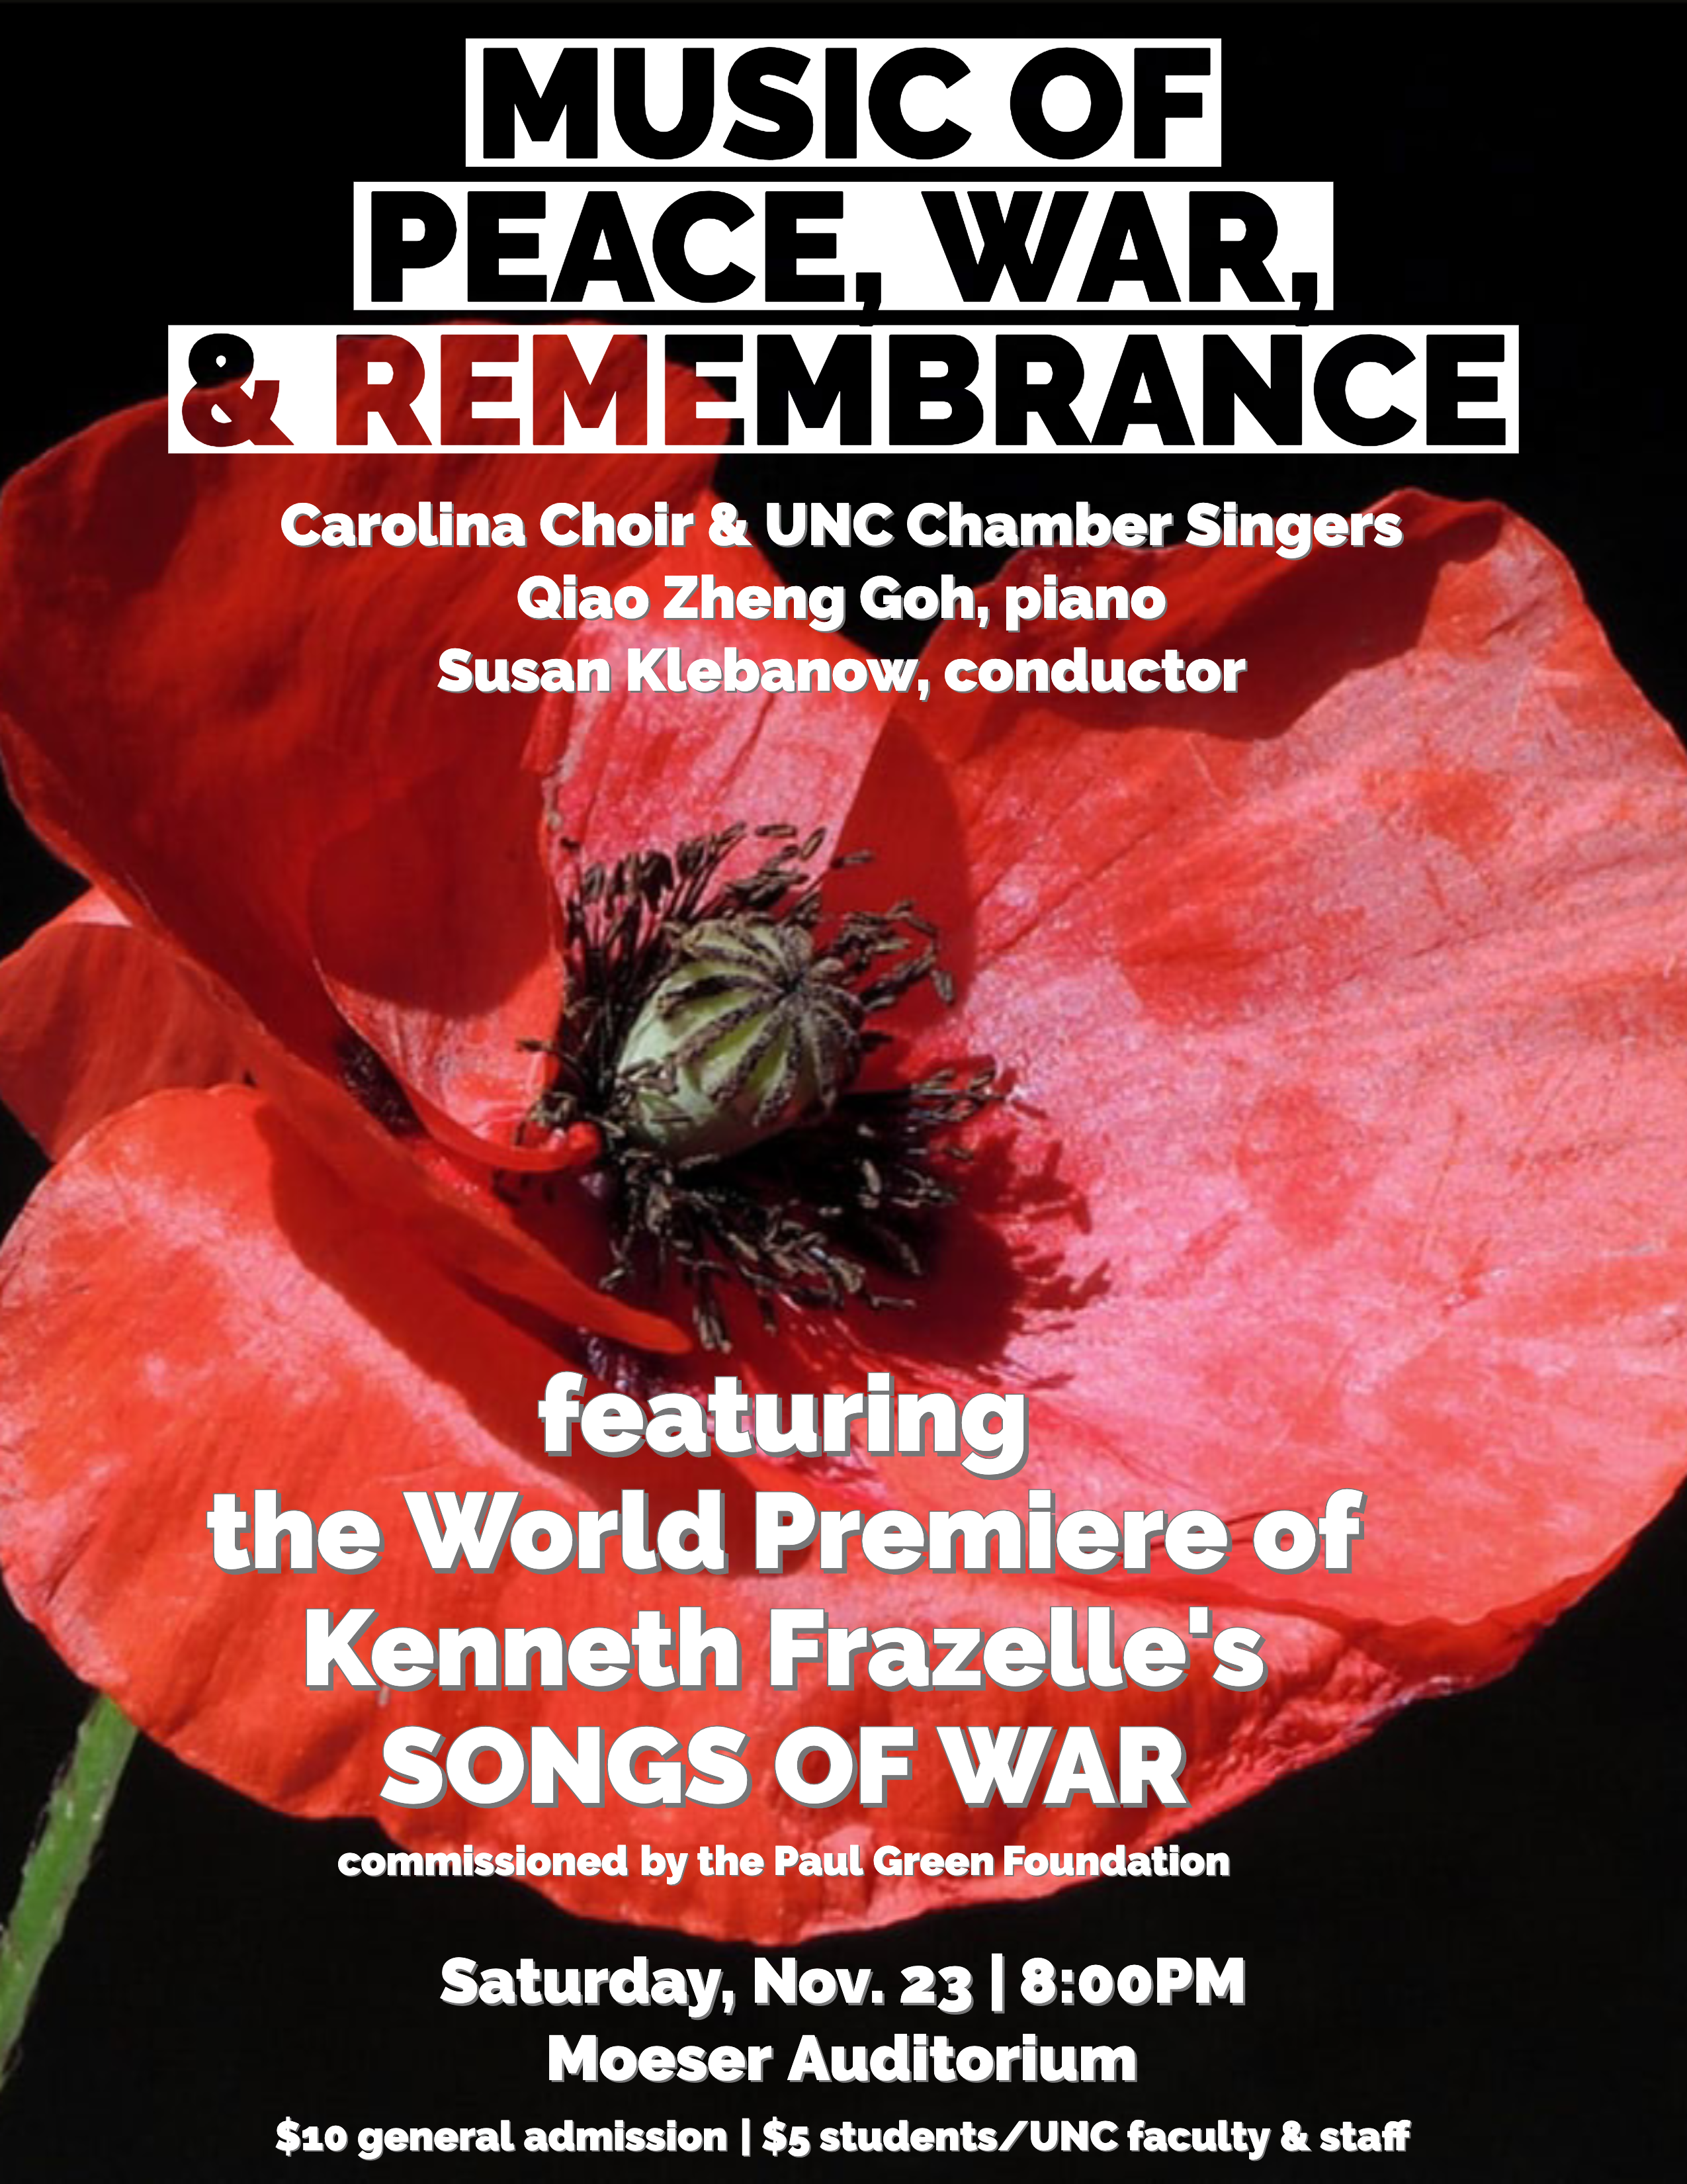 Poster Image, title is: "Music of Peace, War, & Remembrance"